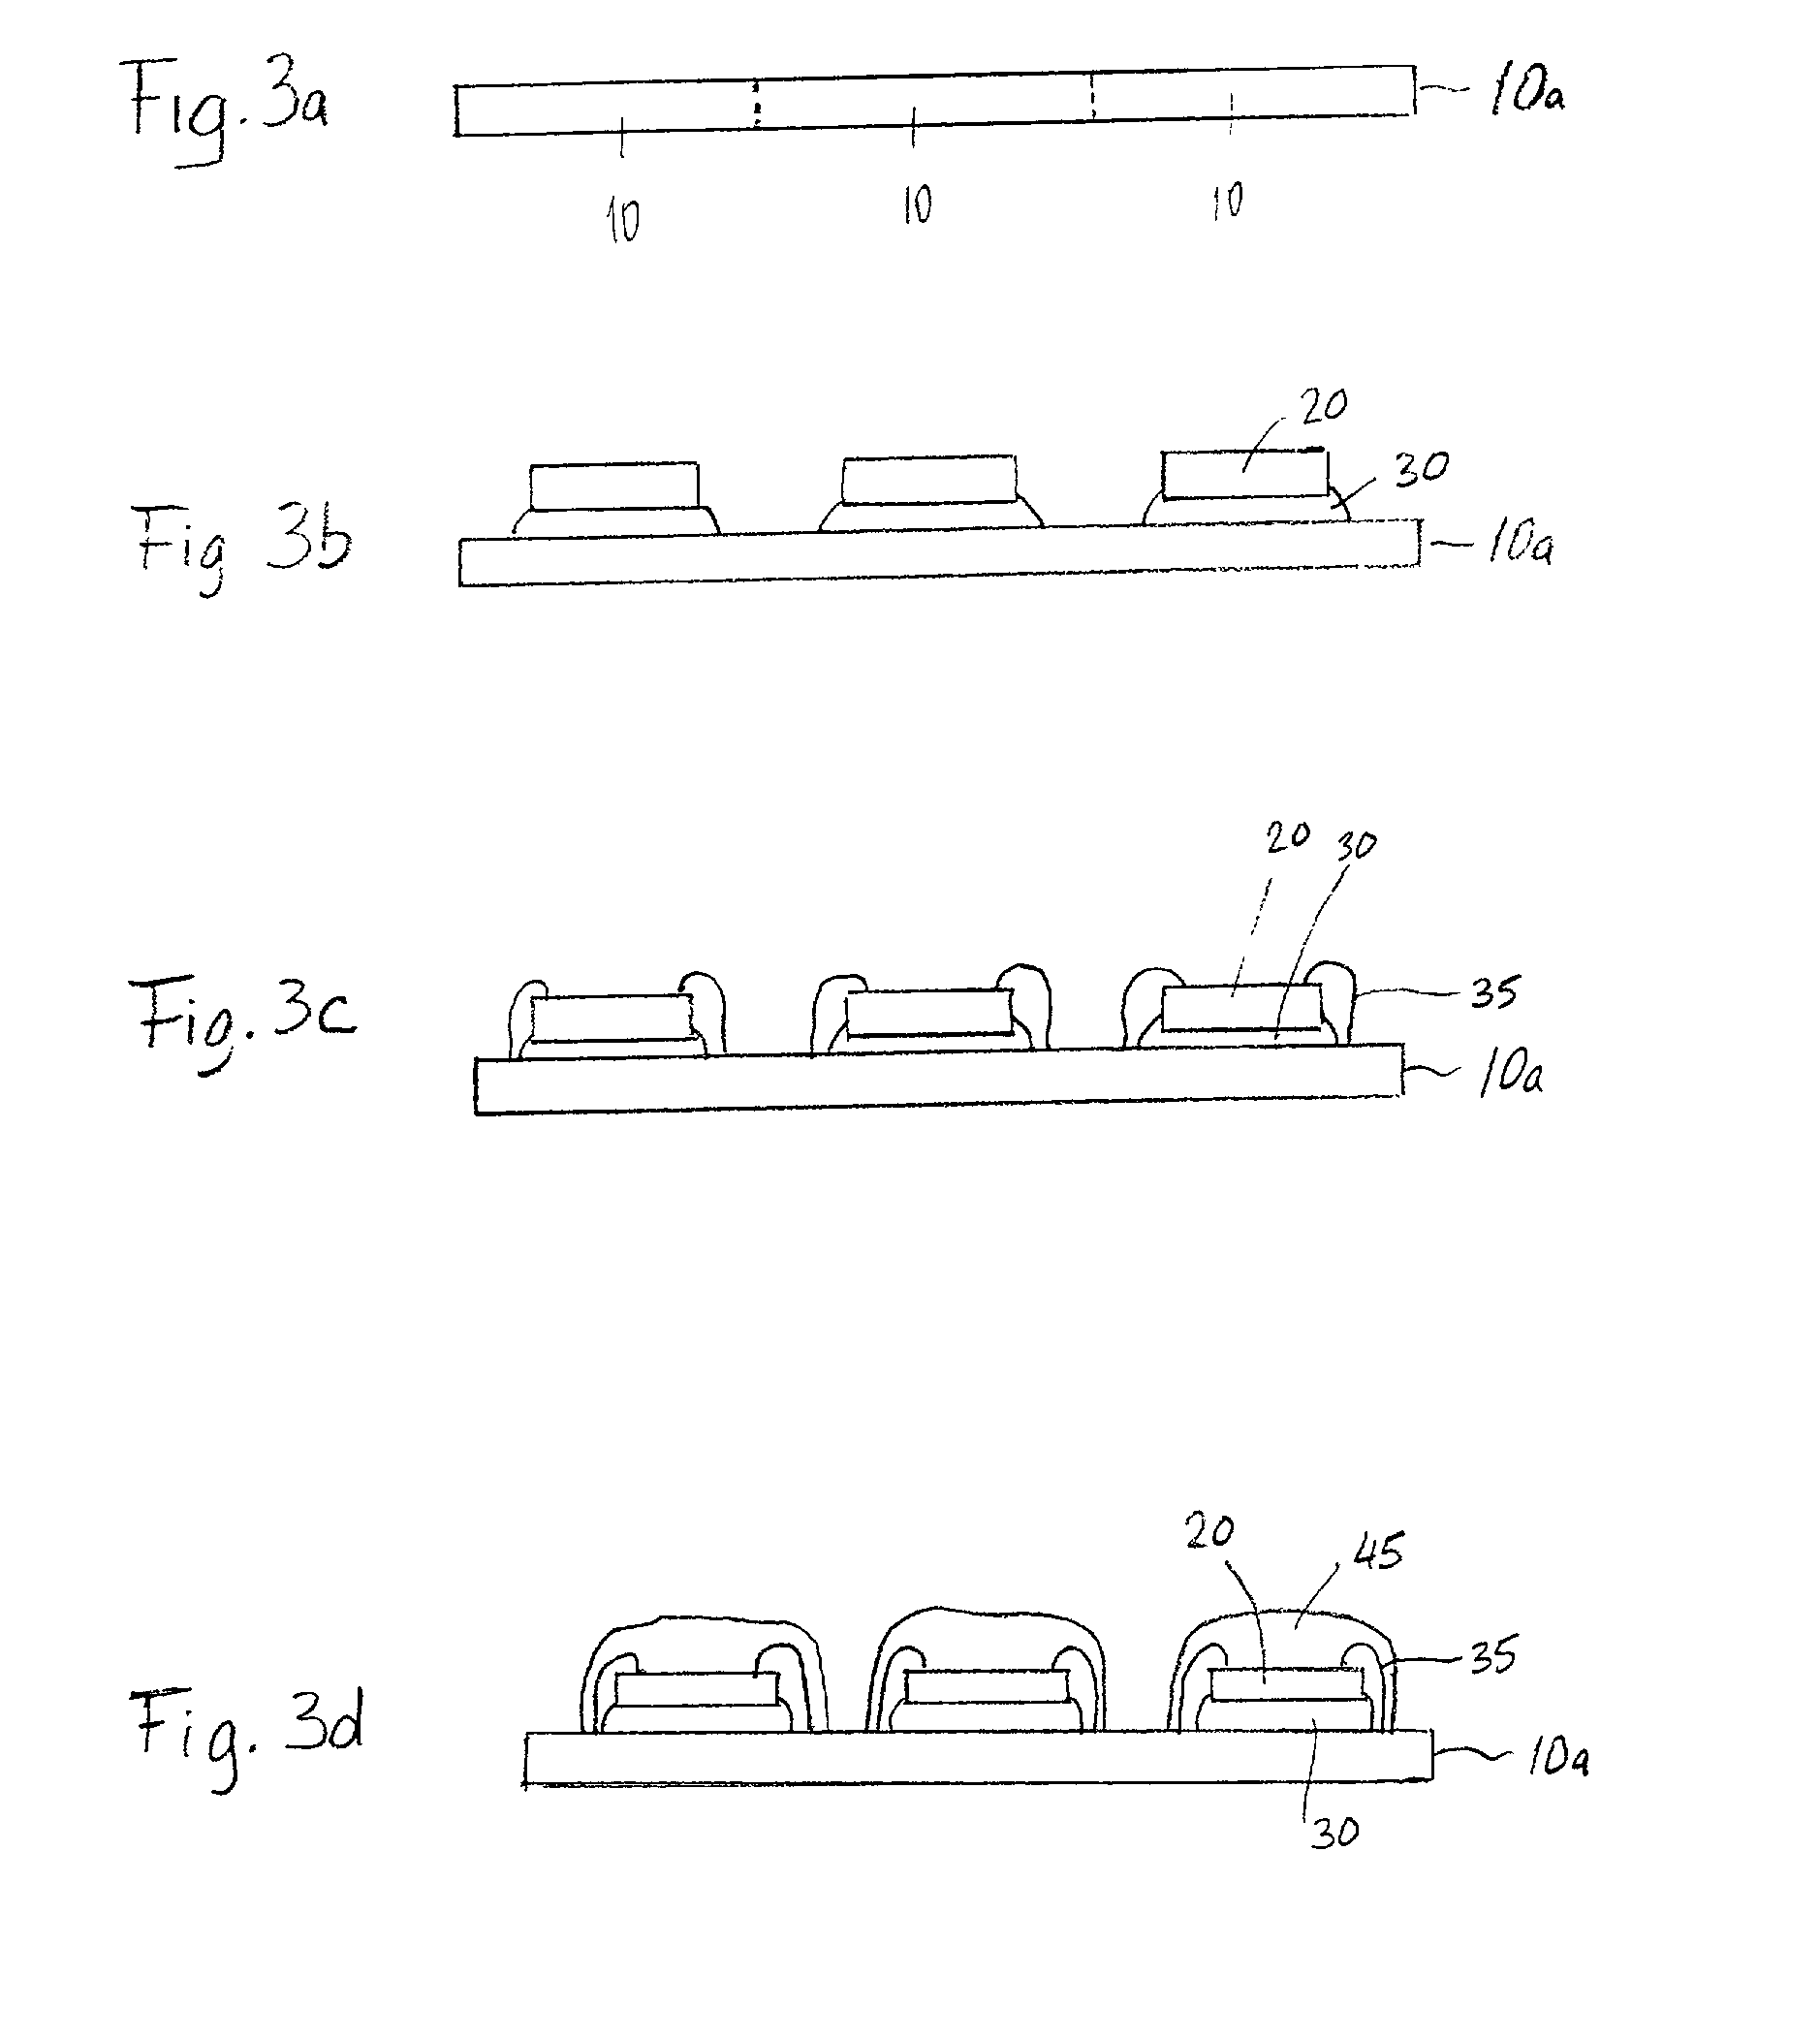 Integrated EMC shield for integrated circuits and multiple chip modules